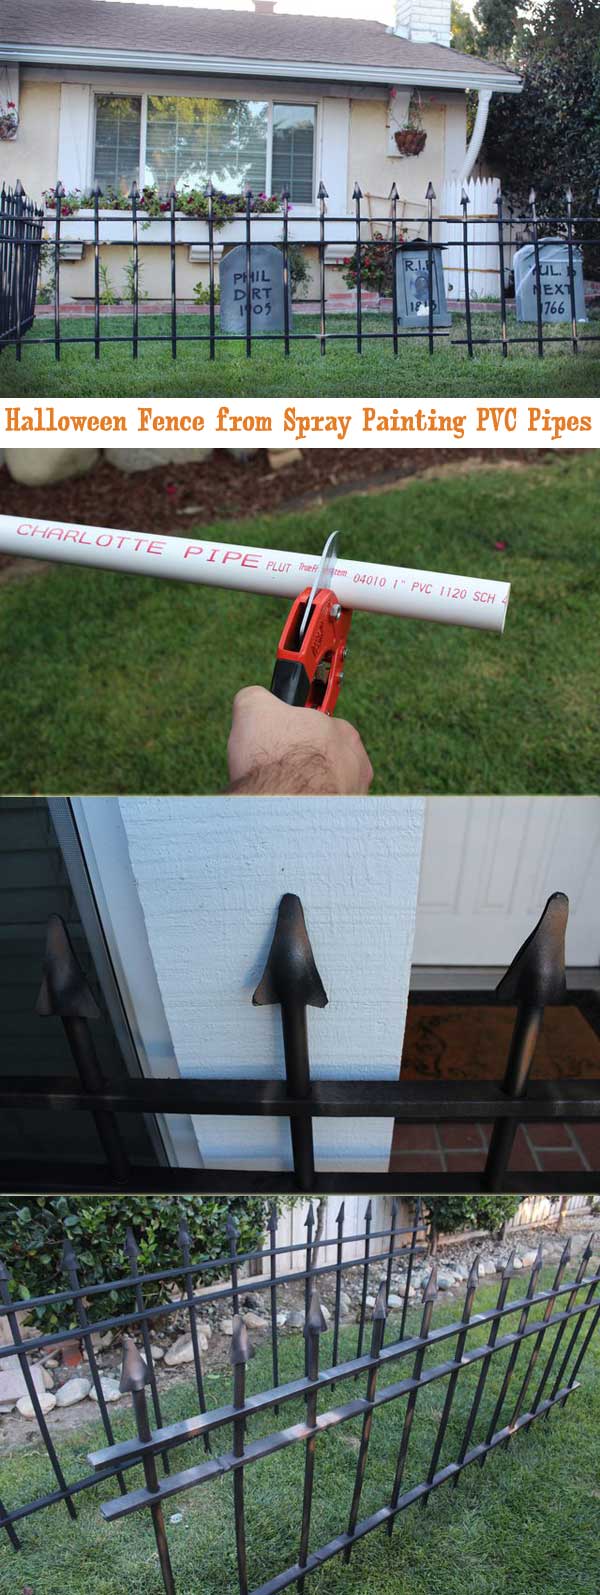 Cool Spray Painting PVC Pipe Projects You Never Thought Of